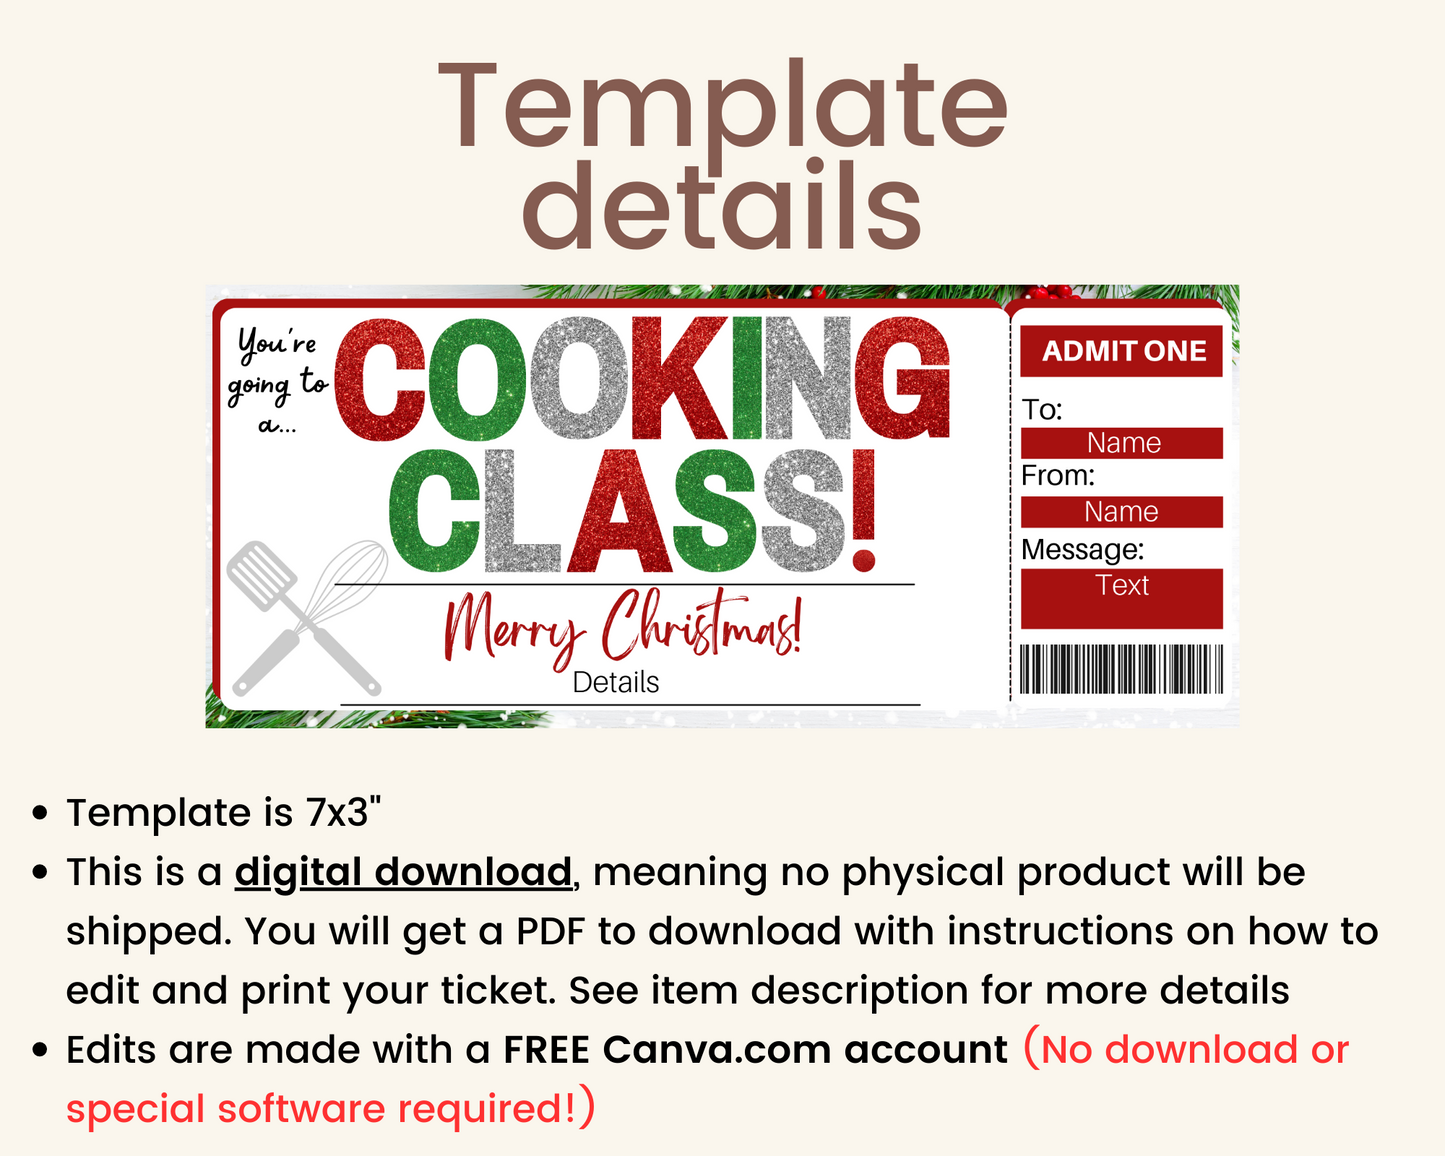 Christmas Cooking Class Gift Ticket